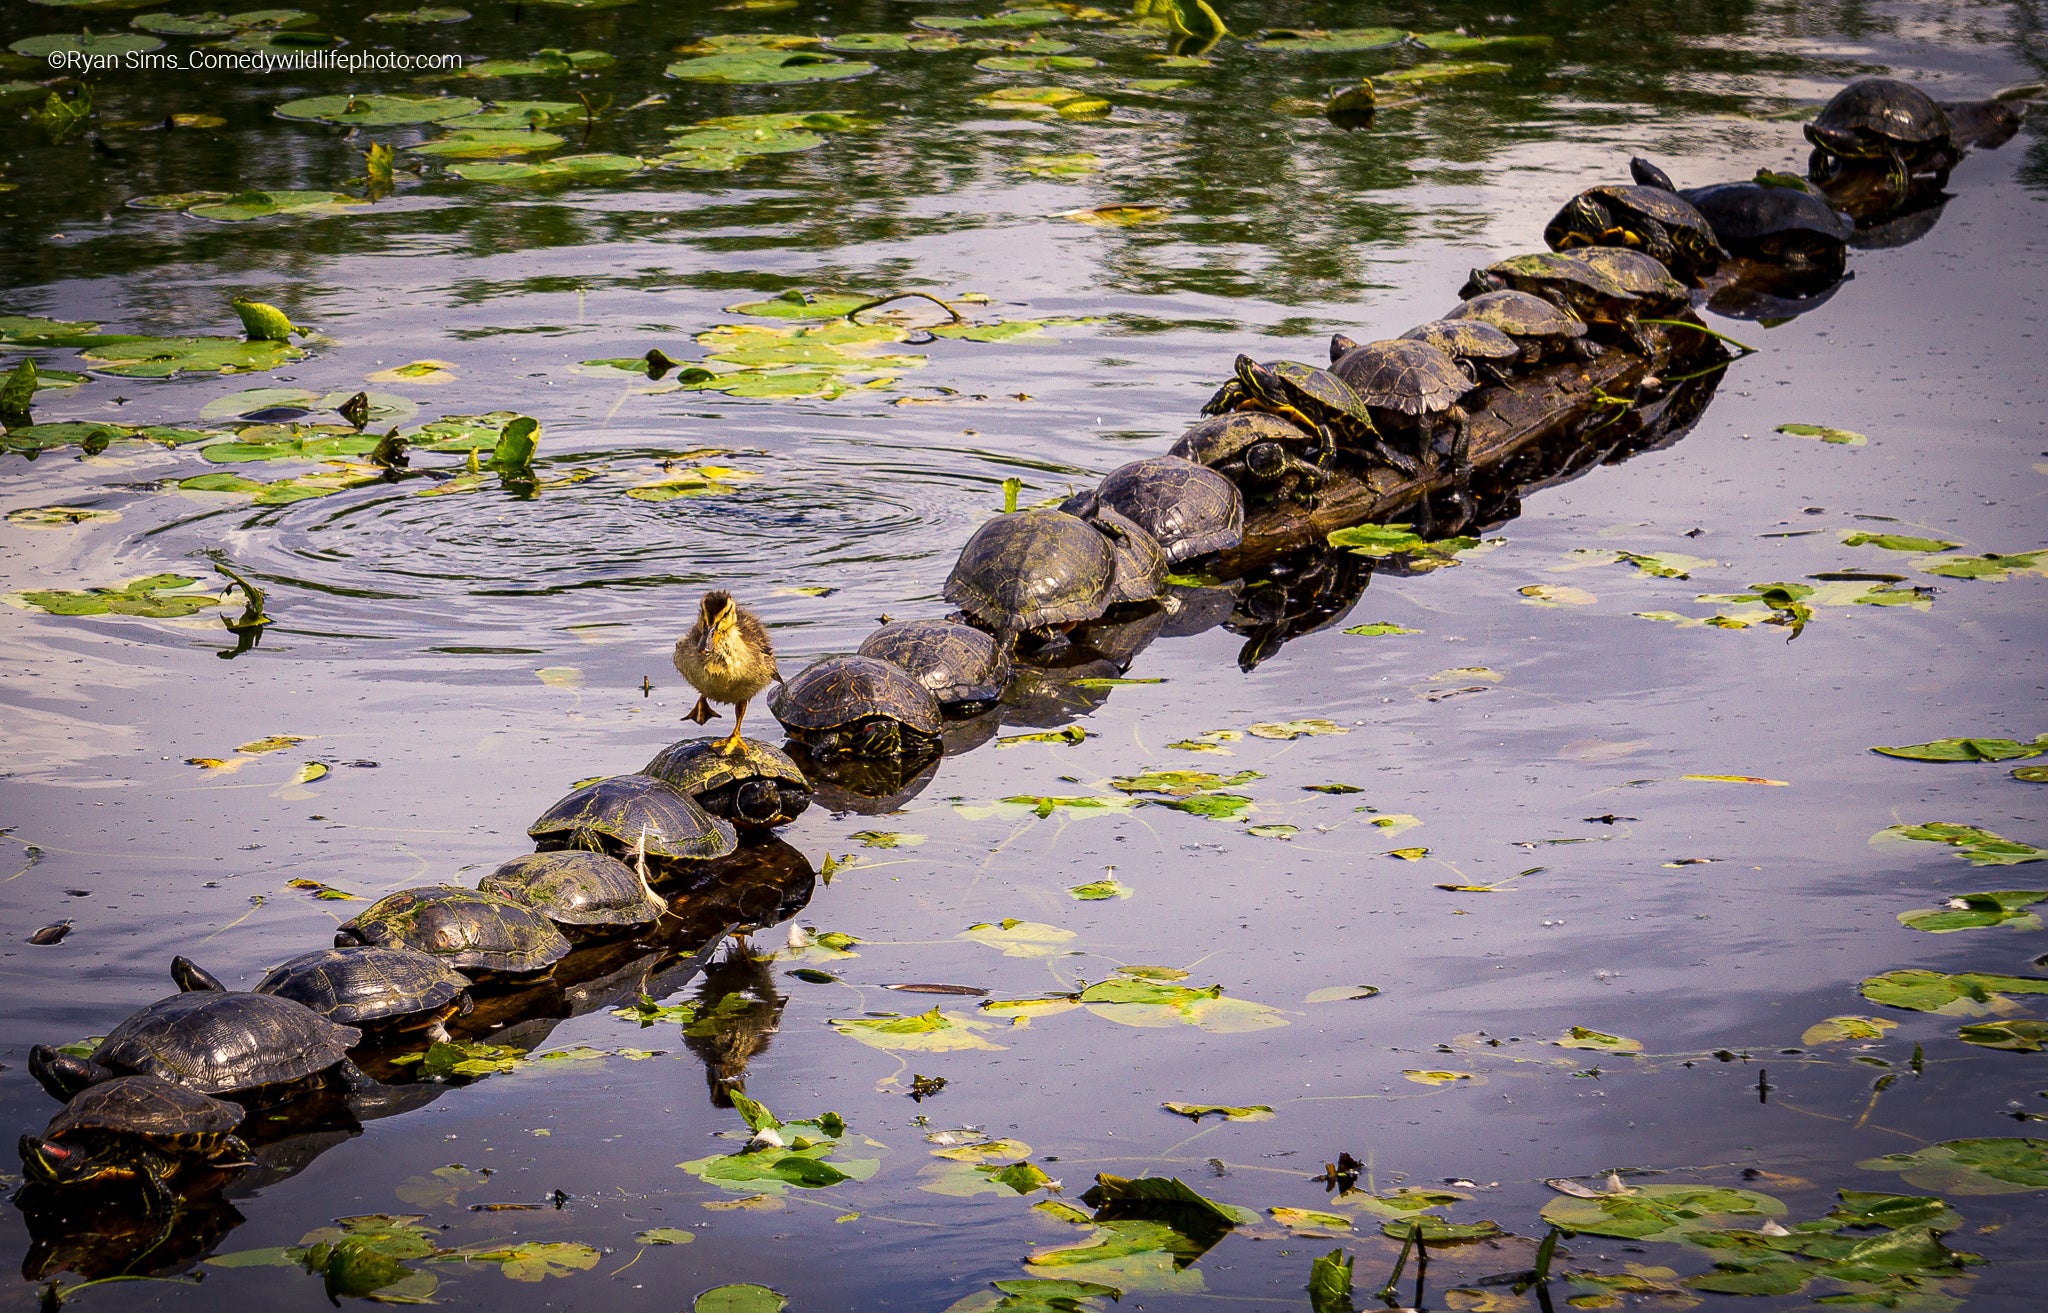 A row of turtles...make way for duckling. (Photo: © Ryan Sims / Comedywildlifephoto.com.)